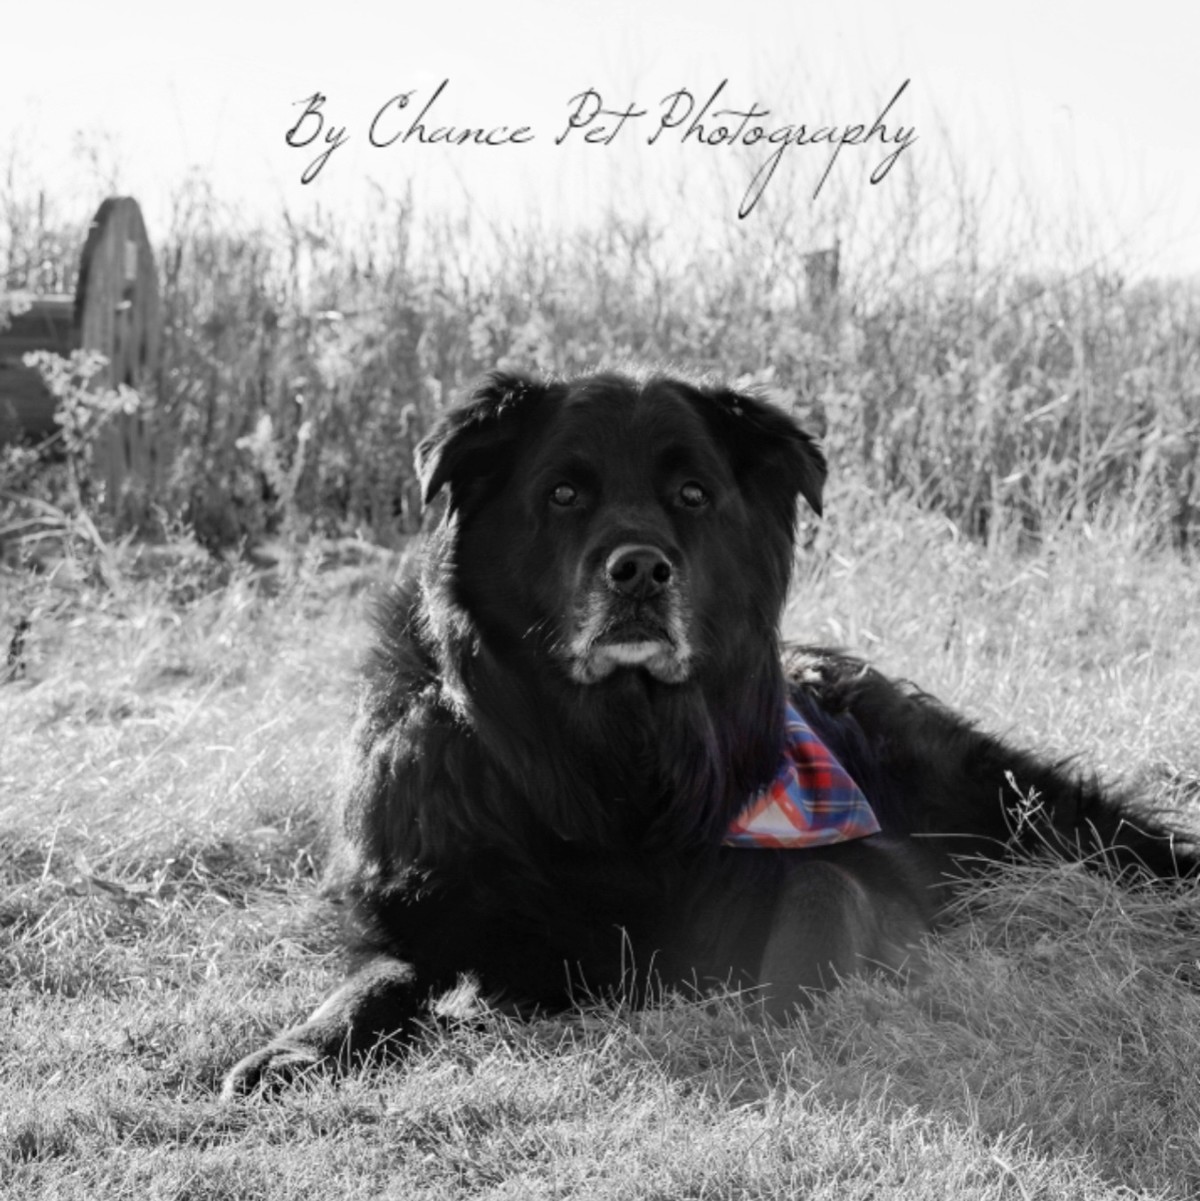 By Chance Pet Photography